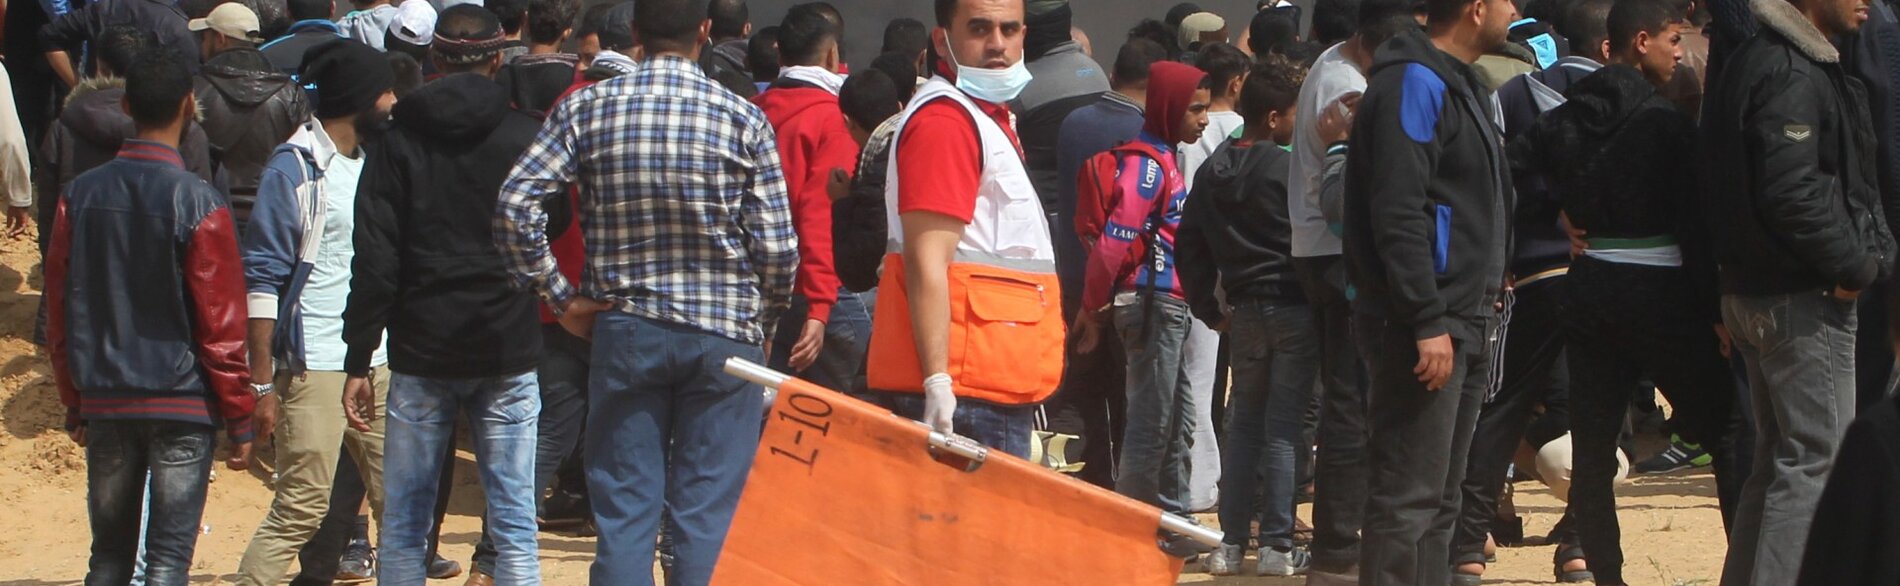 A member of the Palestine Red Crescent Society attends the Great March of Return demonstrations on 27 April 2018 to provide health support to those injured.